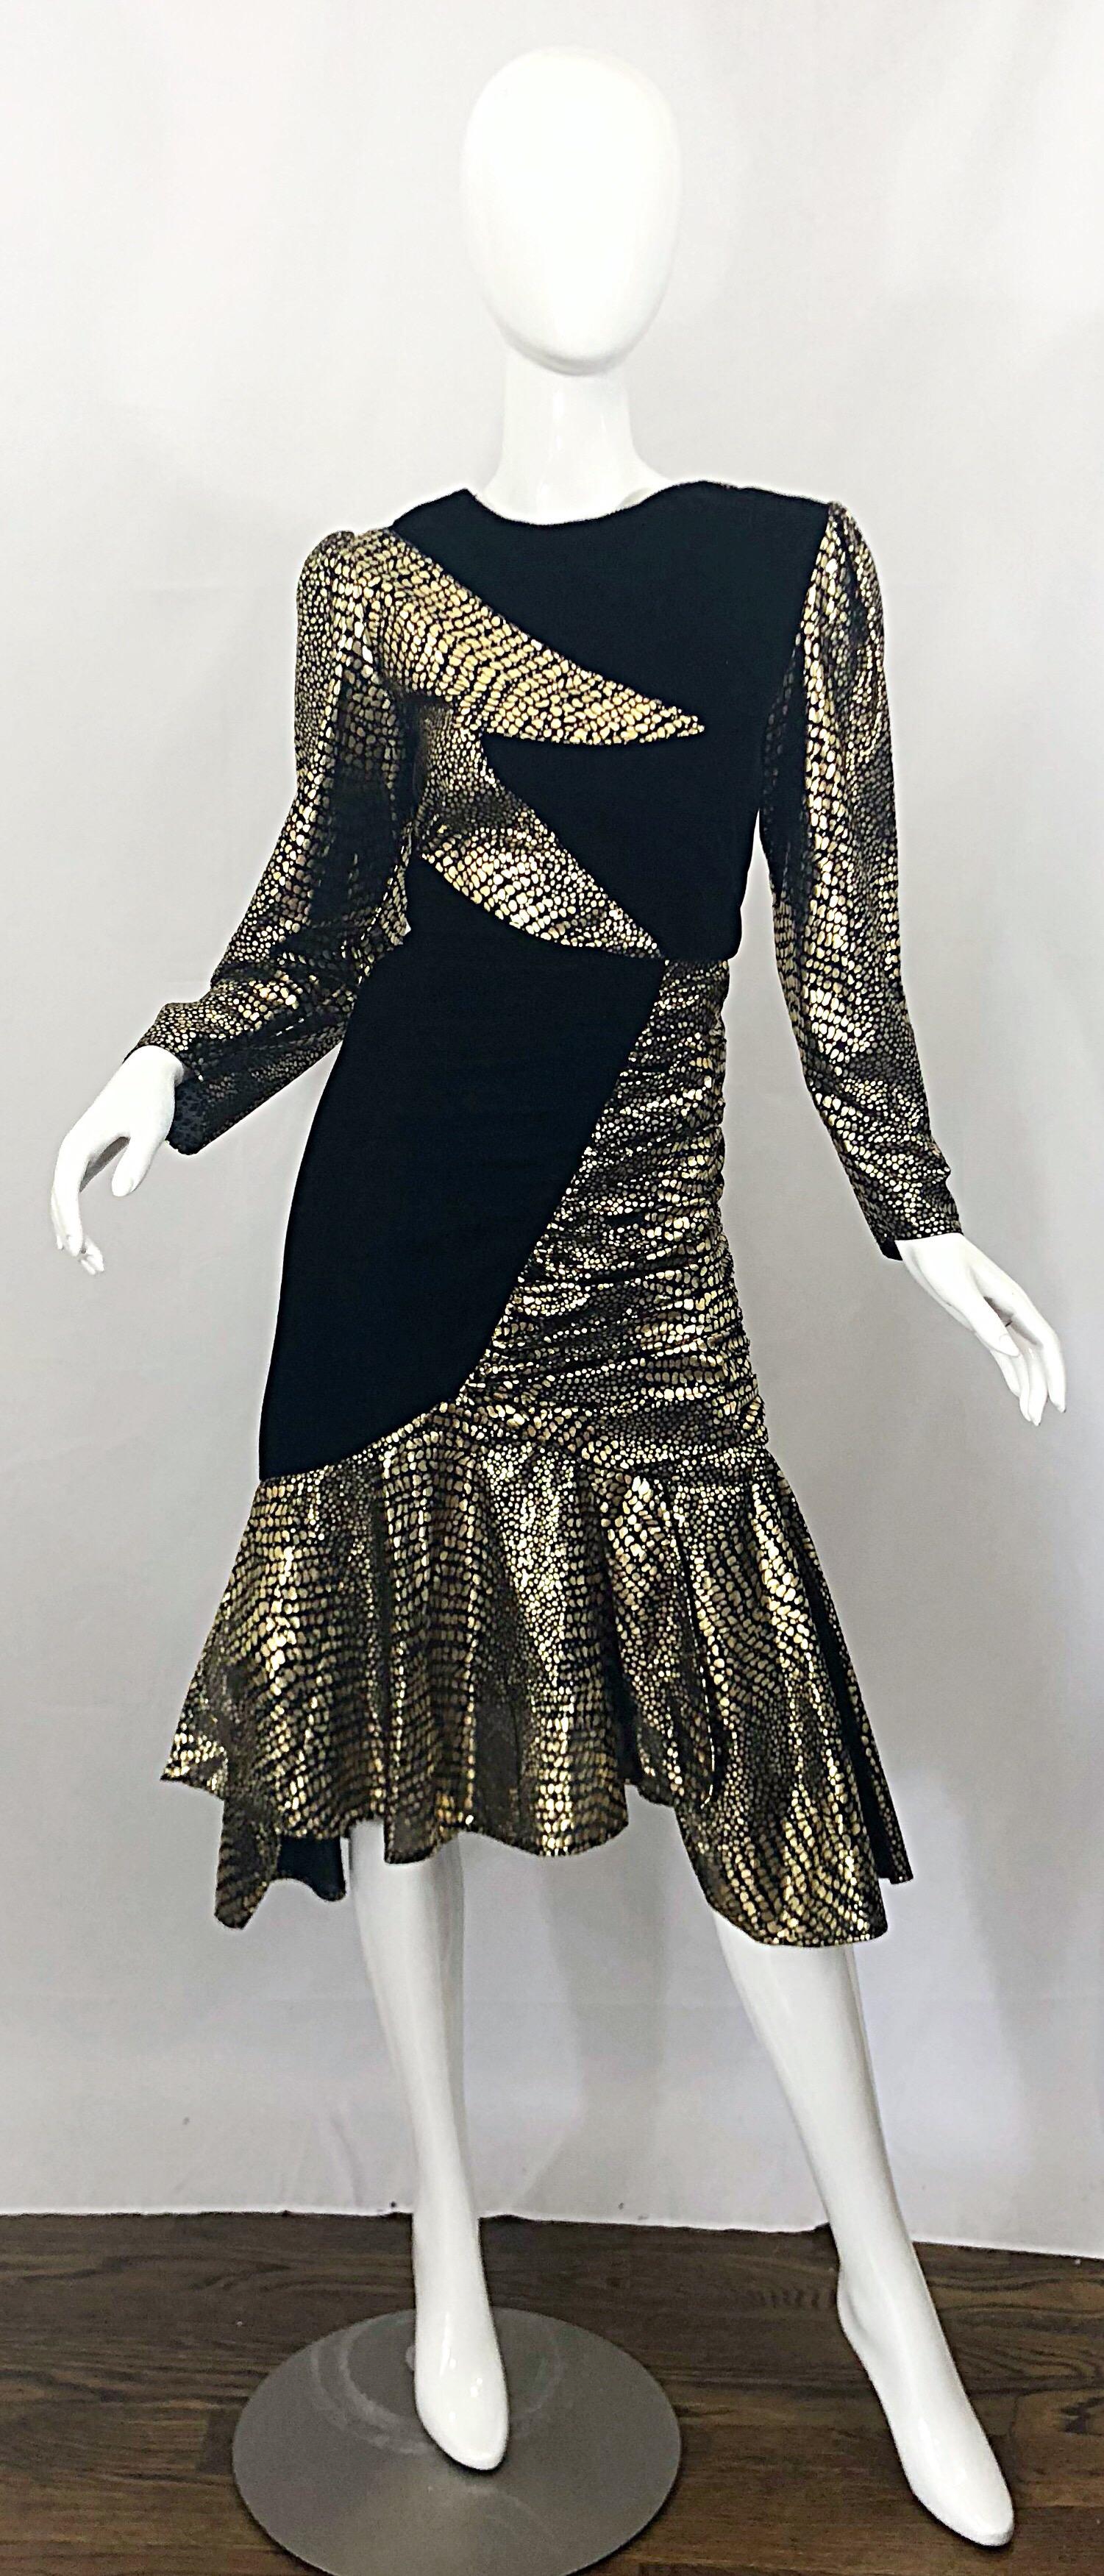 Fabulous 1980s gold and black Avant Garde long sleeve vintage dress! Features soft cotton velvet and a printed alligator gold metallic lame. Looks like a lightning bolt! Gold lame back. Fitted body with a flared Flamenco style hem. Hidden zipperup